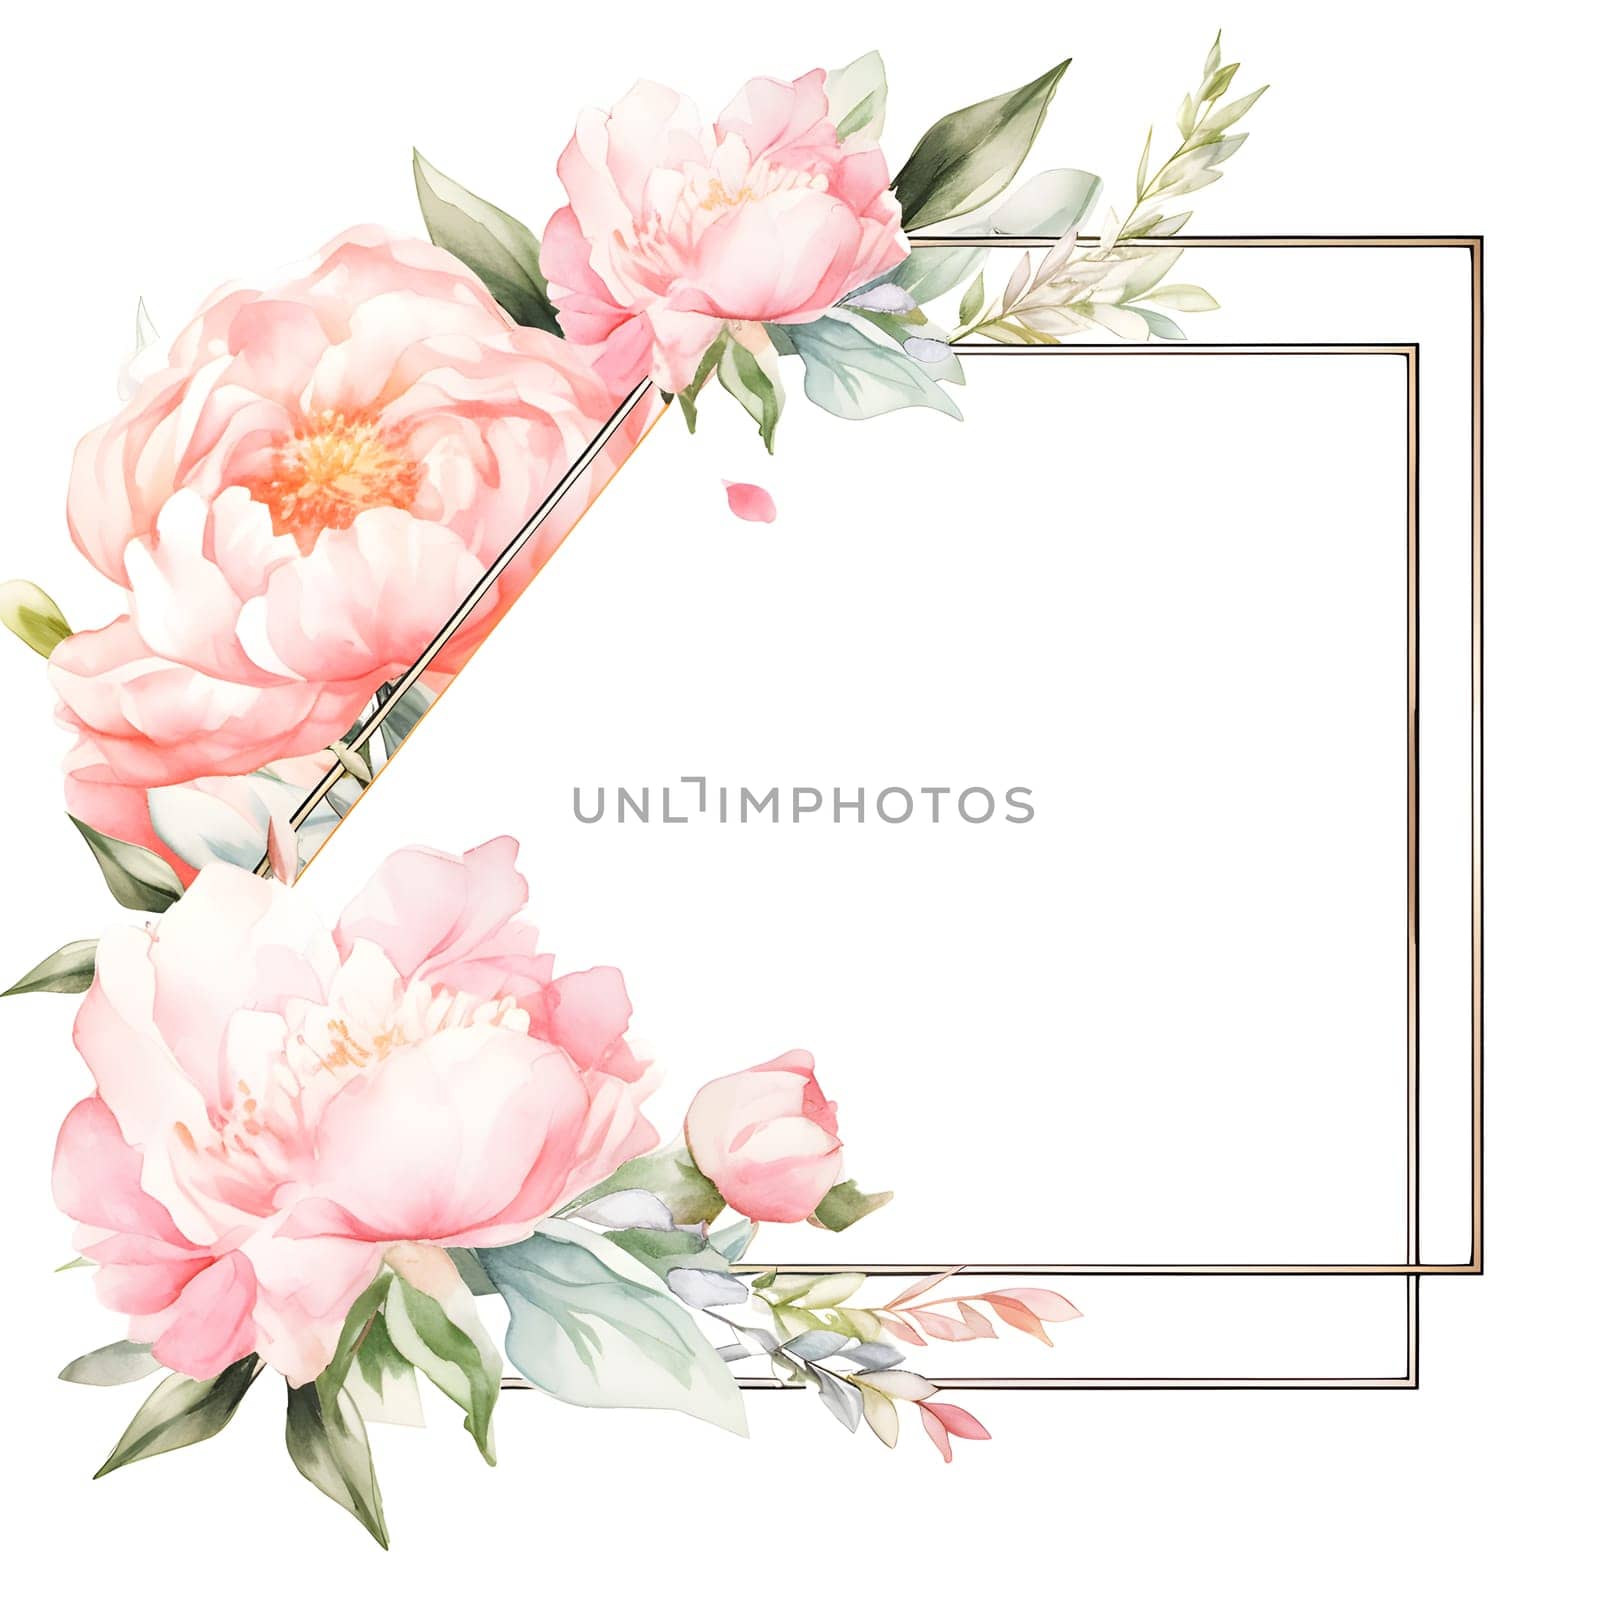 a square frame with pink flowers and green leaves on a white background by Nadtochiy